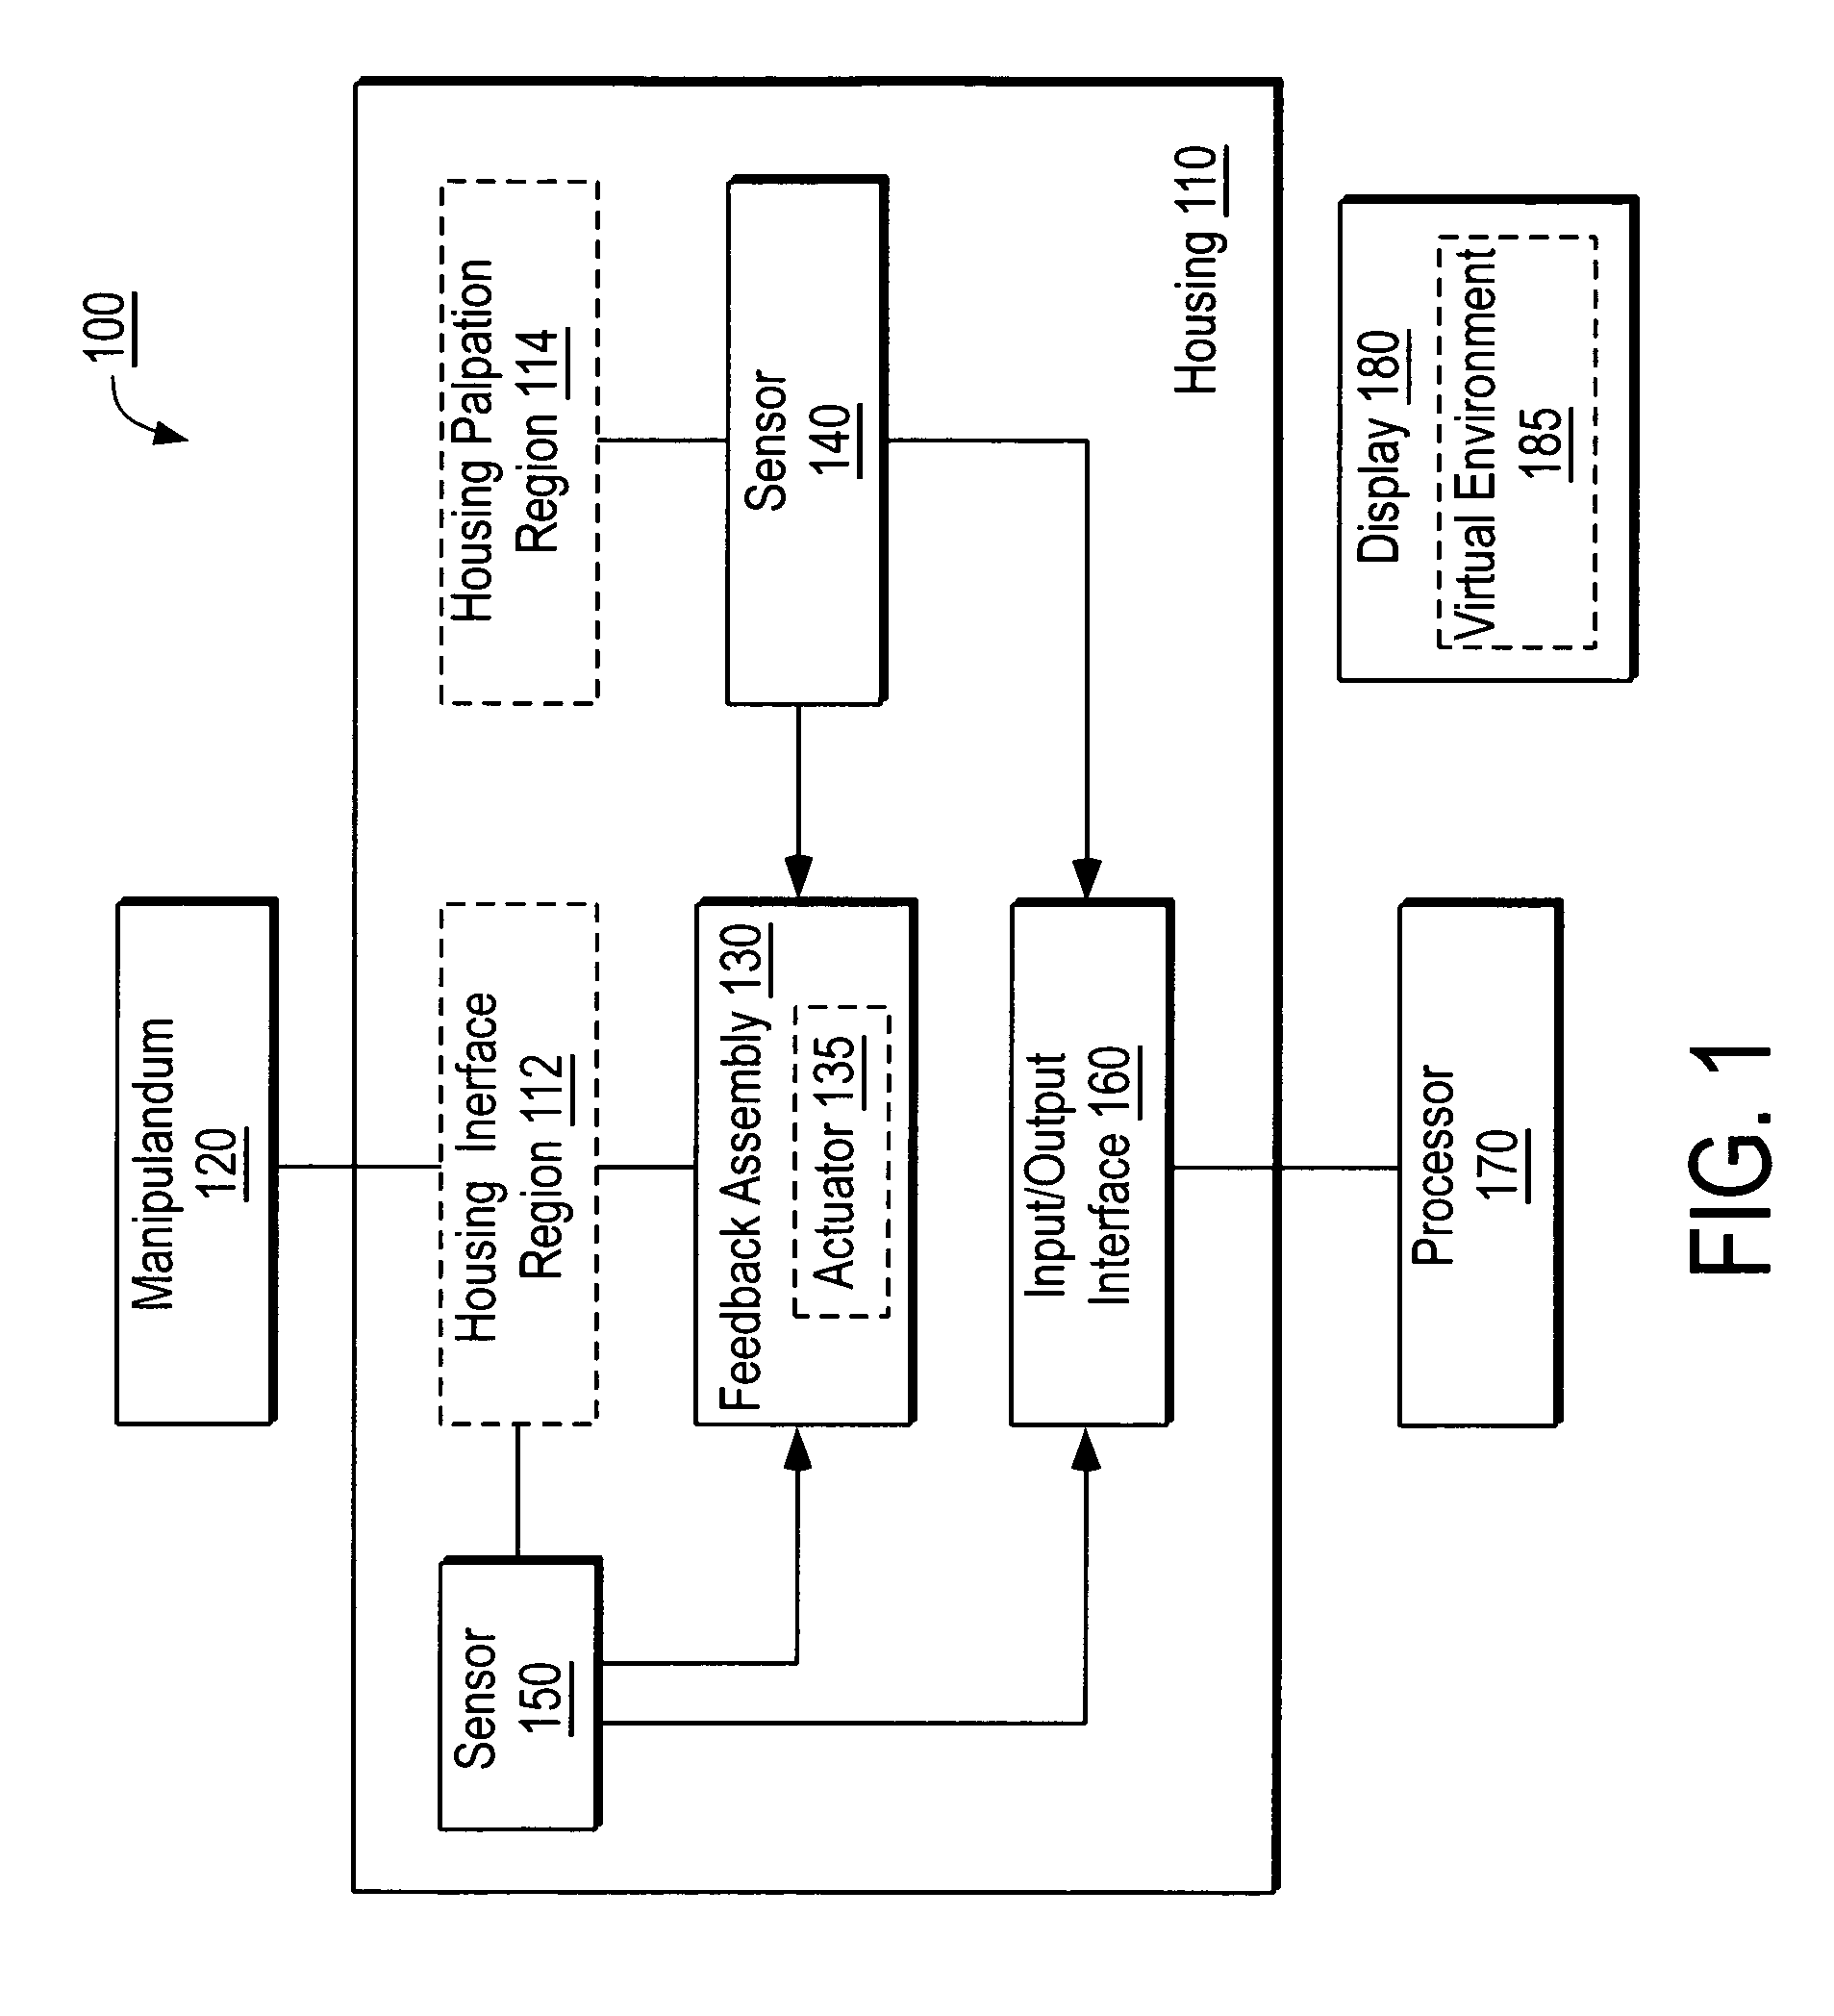 Methods and apparatus for palpation simulation